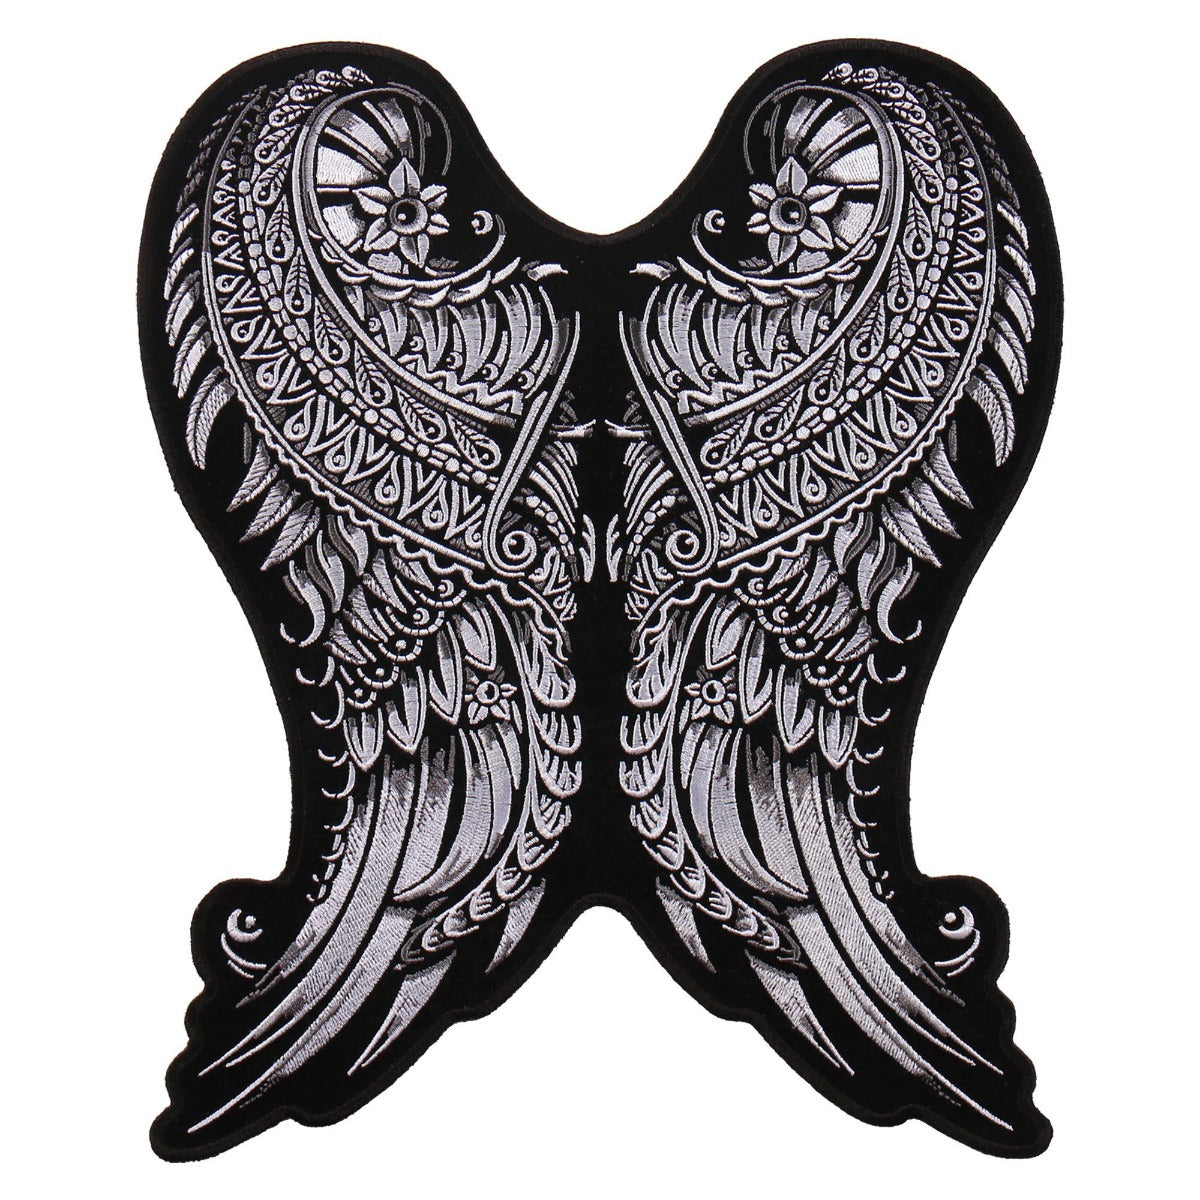 A Hot Leathers Patch Ornate Angel Wings 9" iron-on patch on a white background, perfect for clothing.